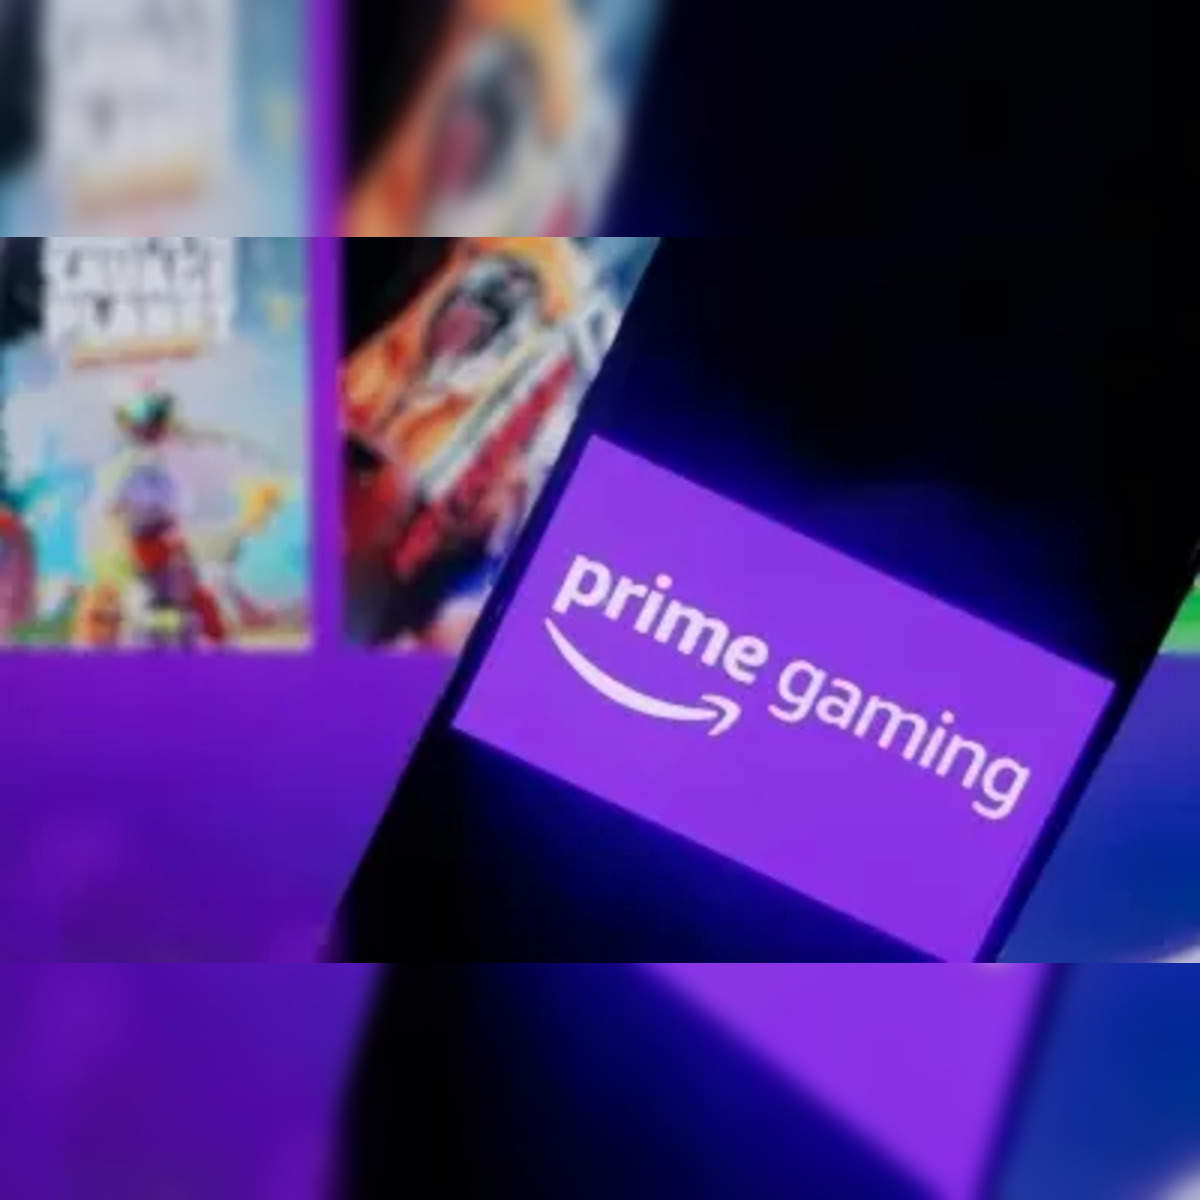 Prime Gaming now in India